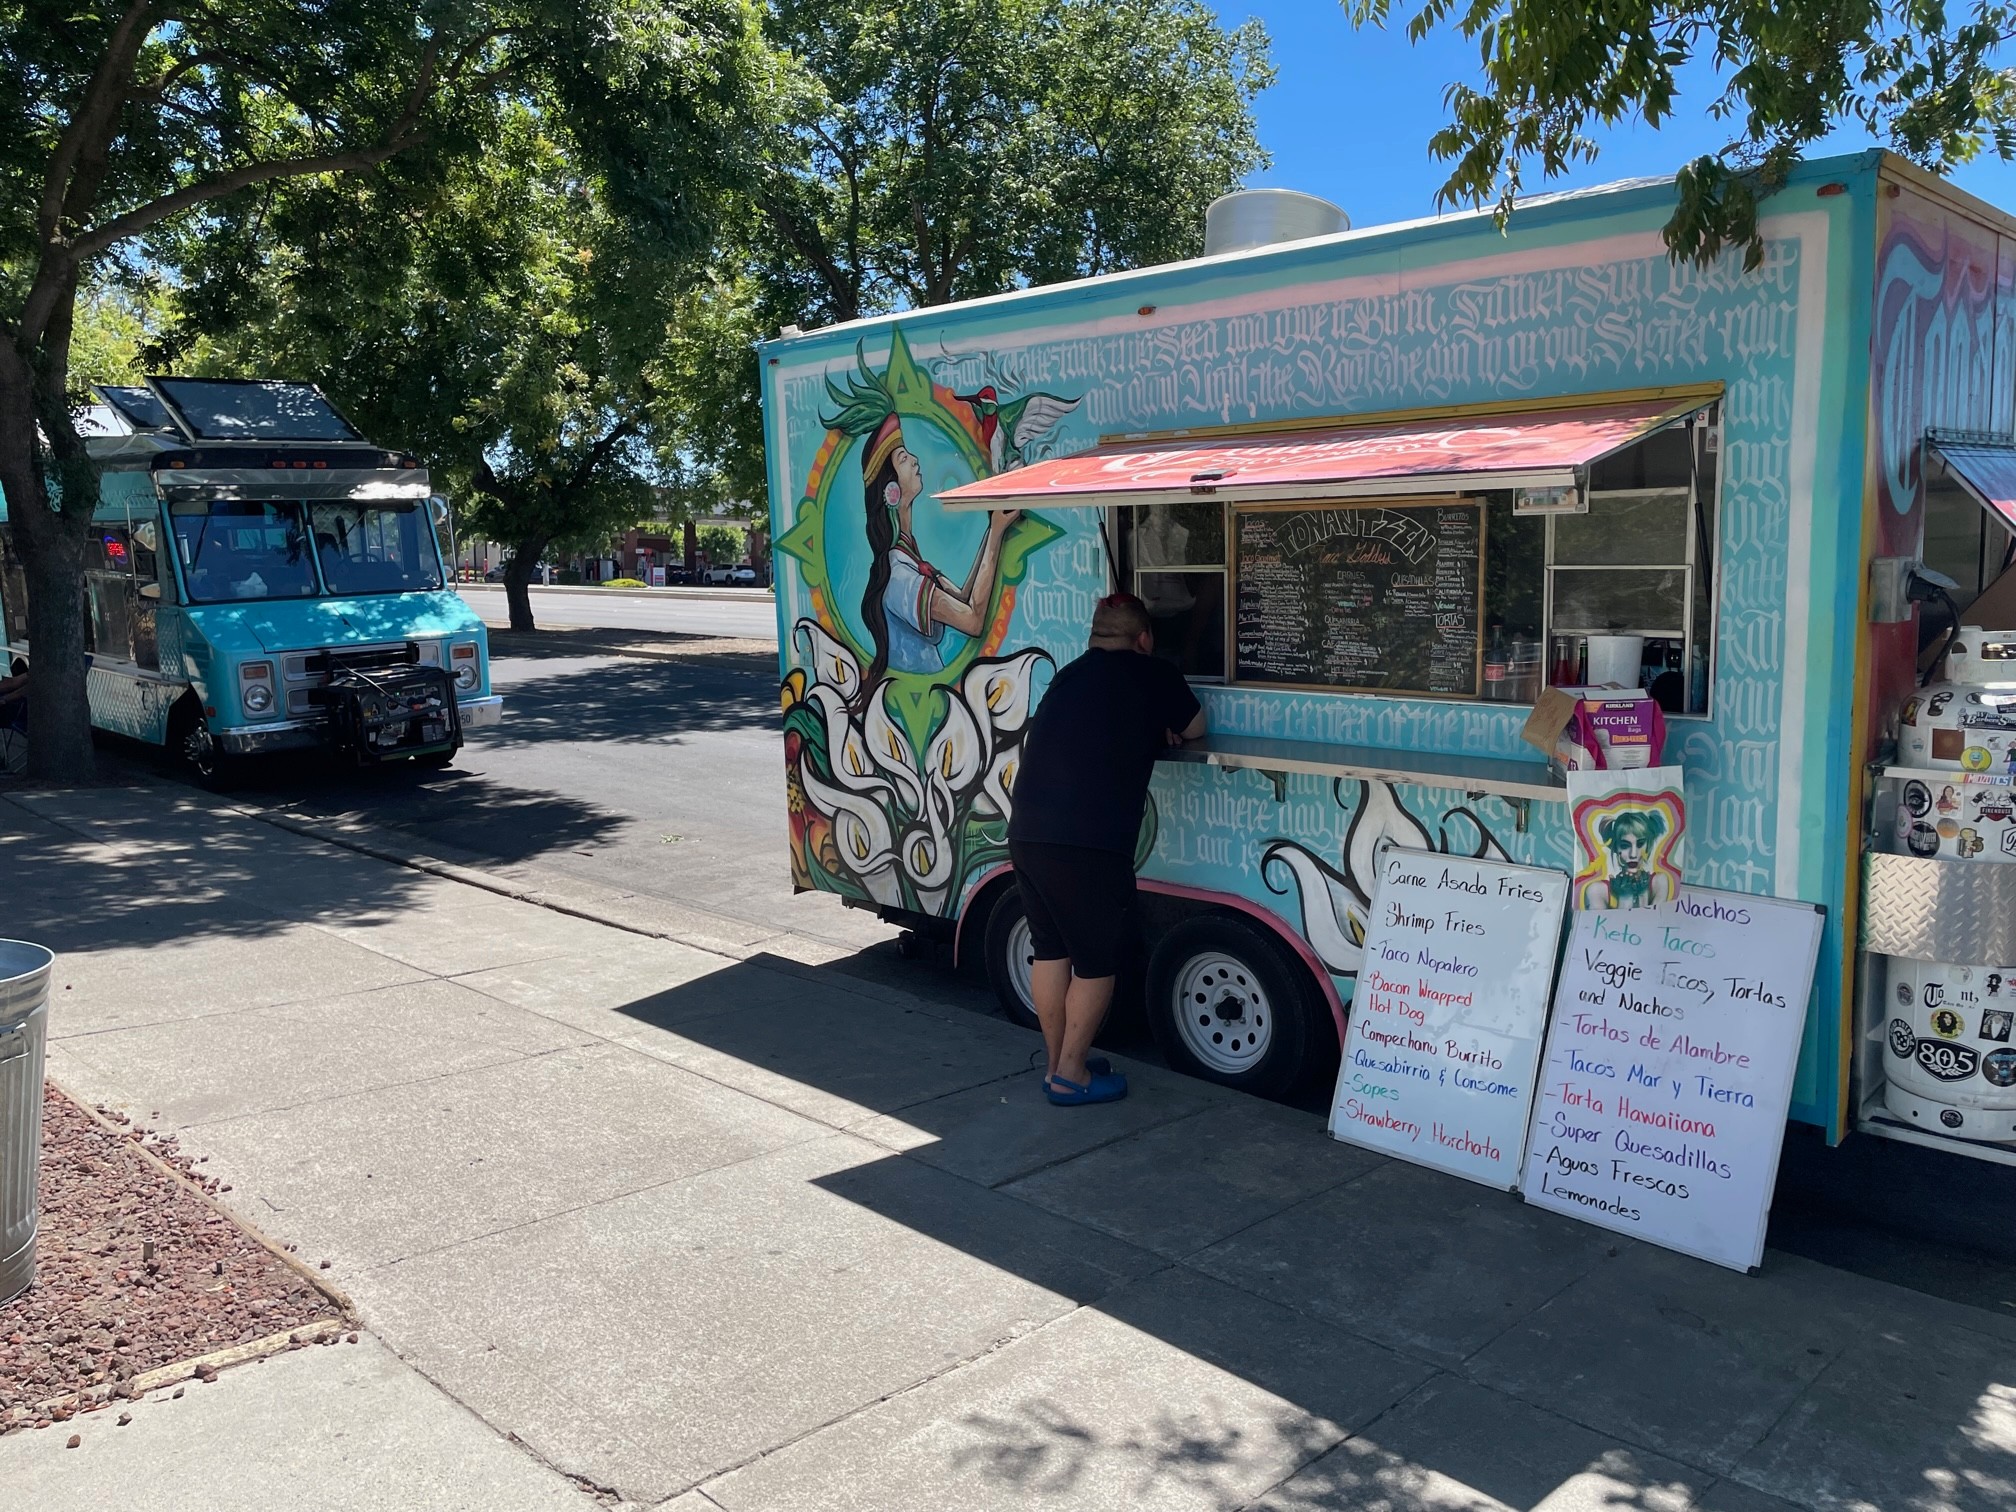 Ice Cream Machine Car Porn - Covered California Explains Rate Increases | Reinvesting in Stockton |  Woodland Opera House Musical â€œIn the Heightsâ€ - capradio.org